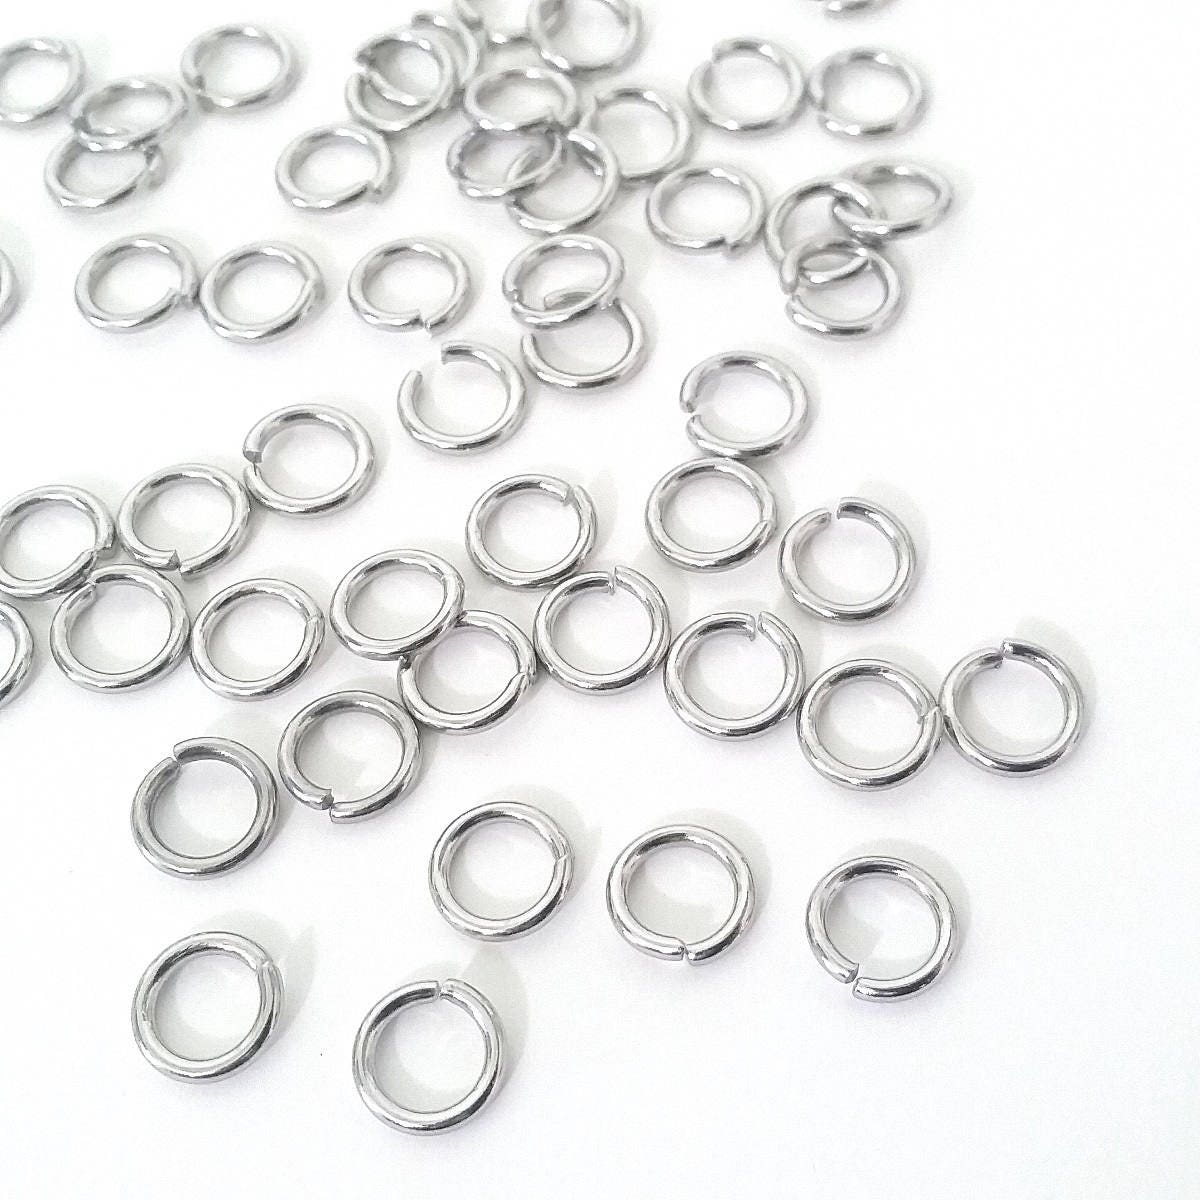 100pcs Adabele Authentic 925 Sterling Silver Open Jump Rings 12mm O Ring  Connector (Strong Wire 1mm/18 Gauge) for Jewelry Craft Making SS79-12